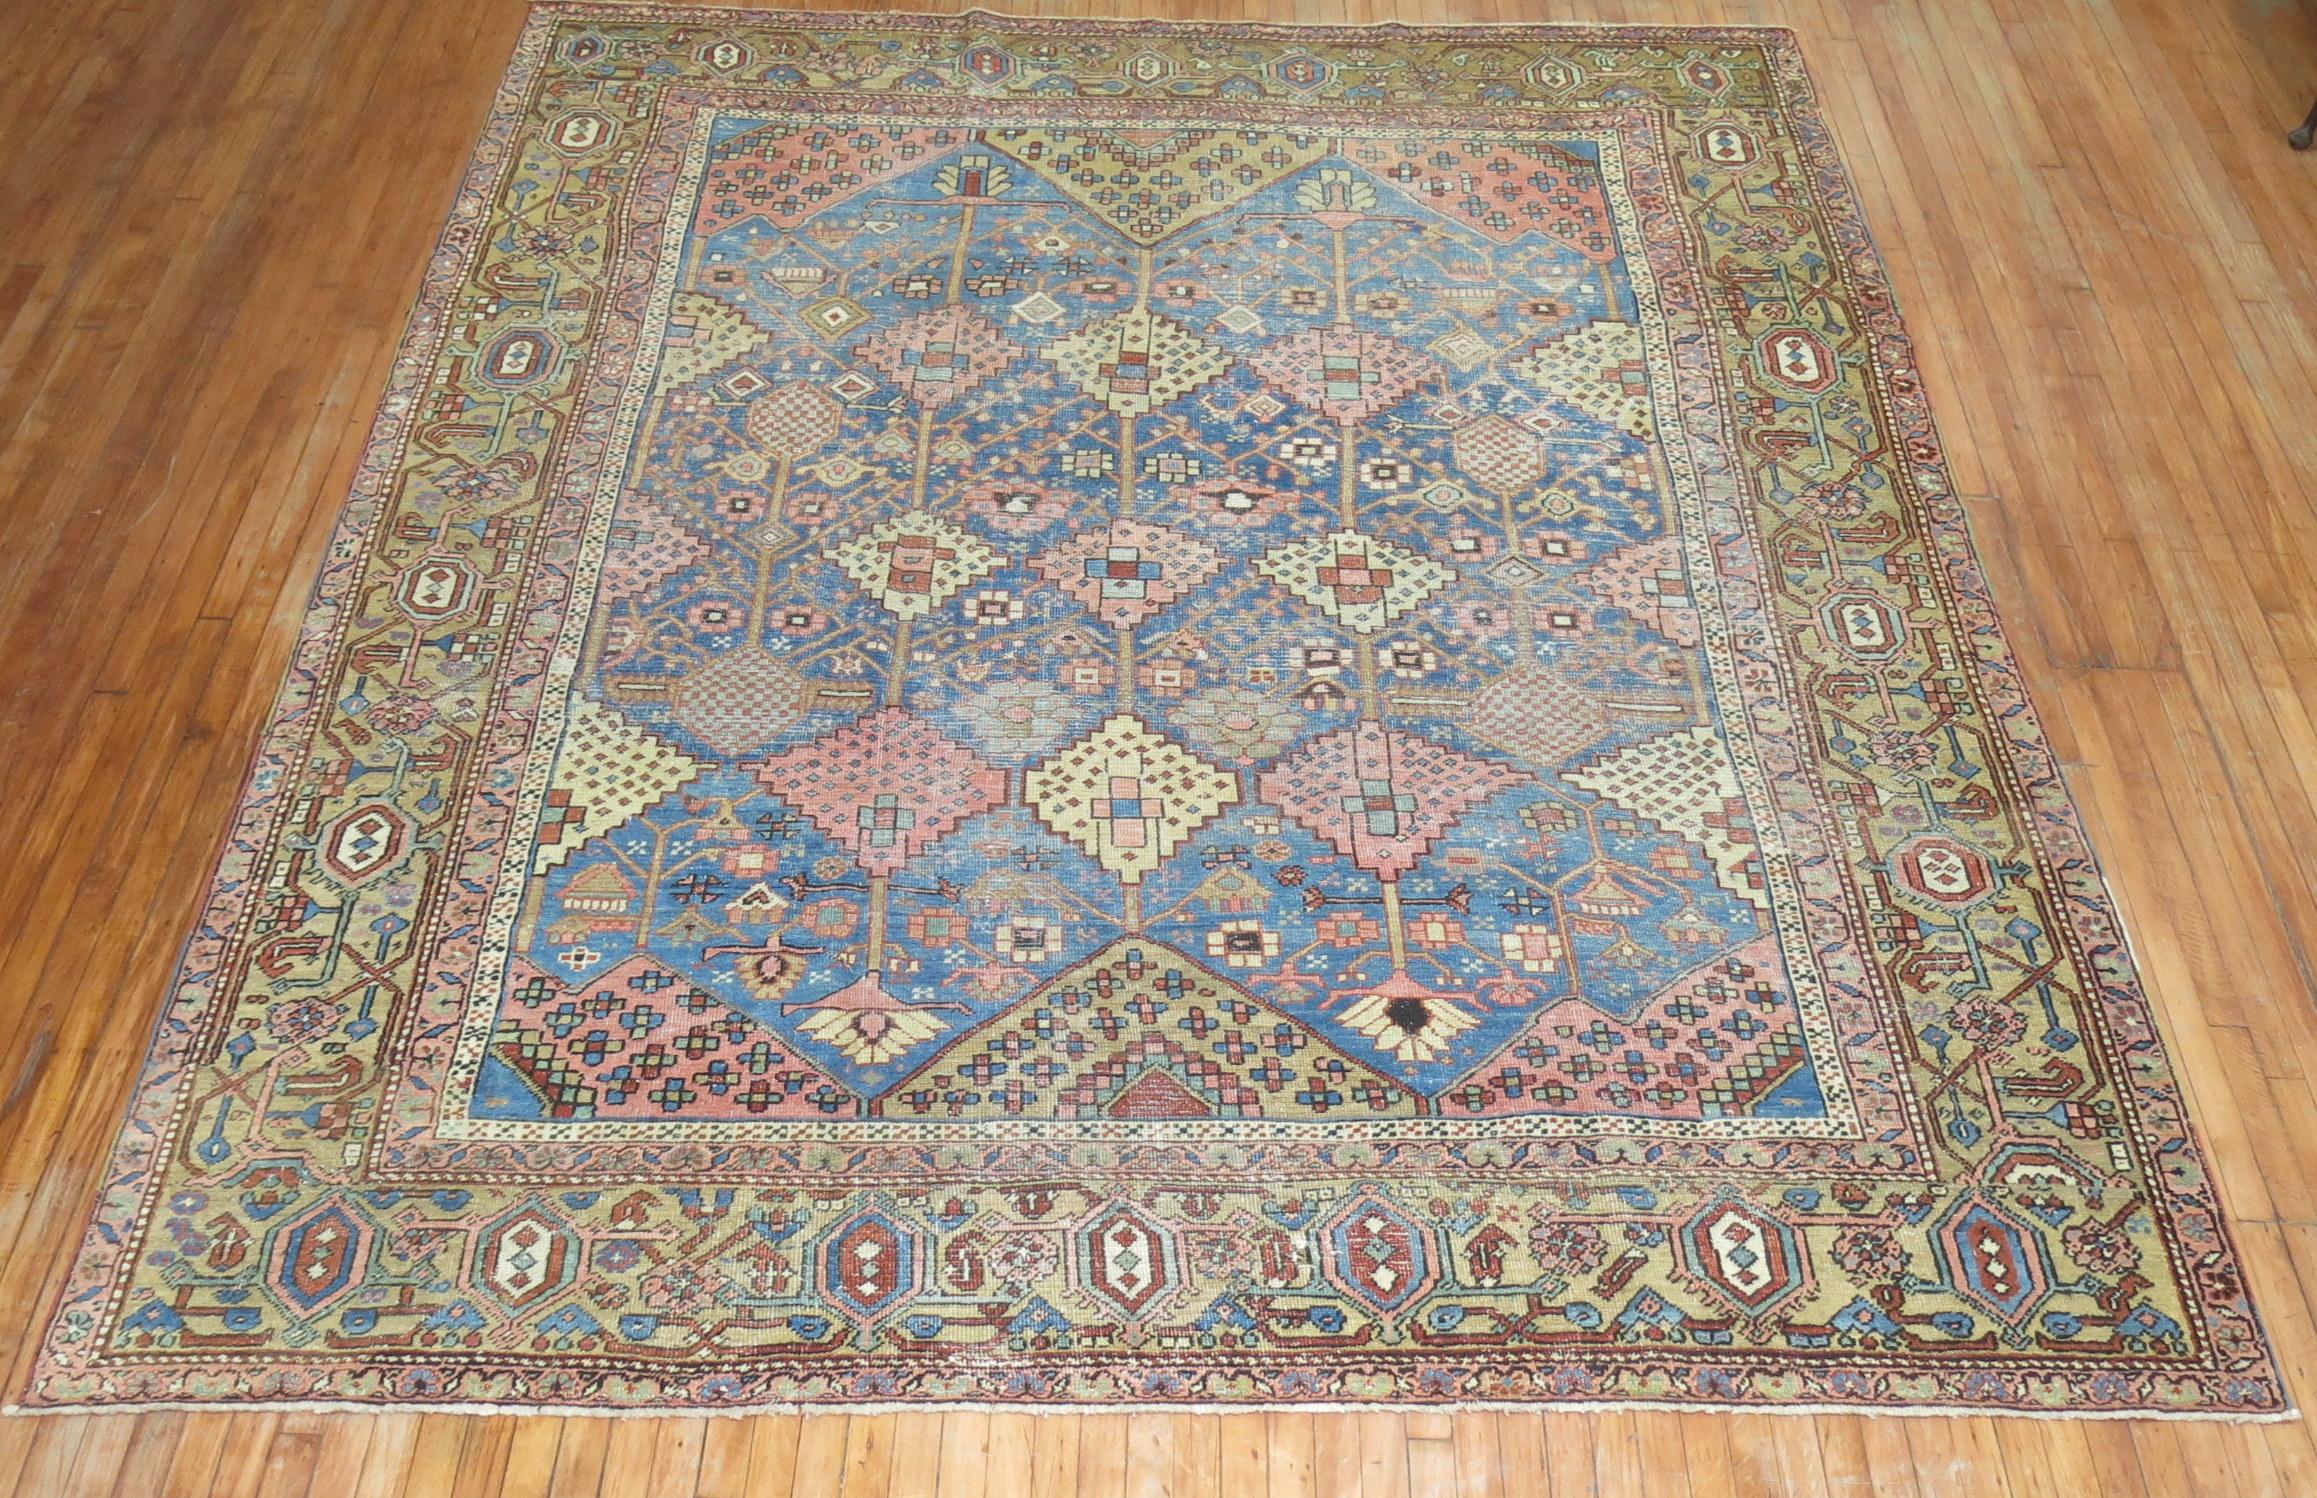 Stunning sky blue field early 20th century decorative Persian Heriz featuring an all-over large scale geometric desigb

Measures: 9'4'' x 11'.